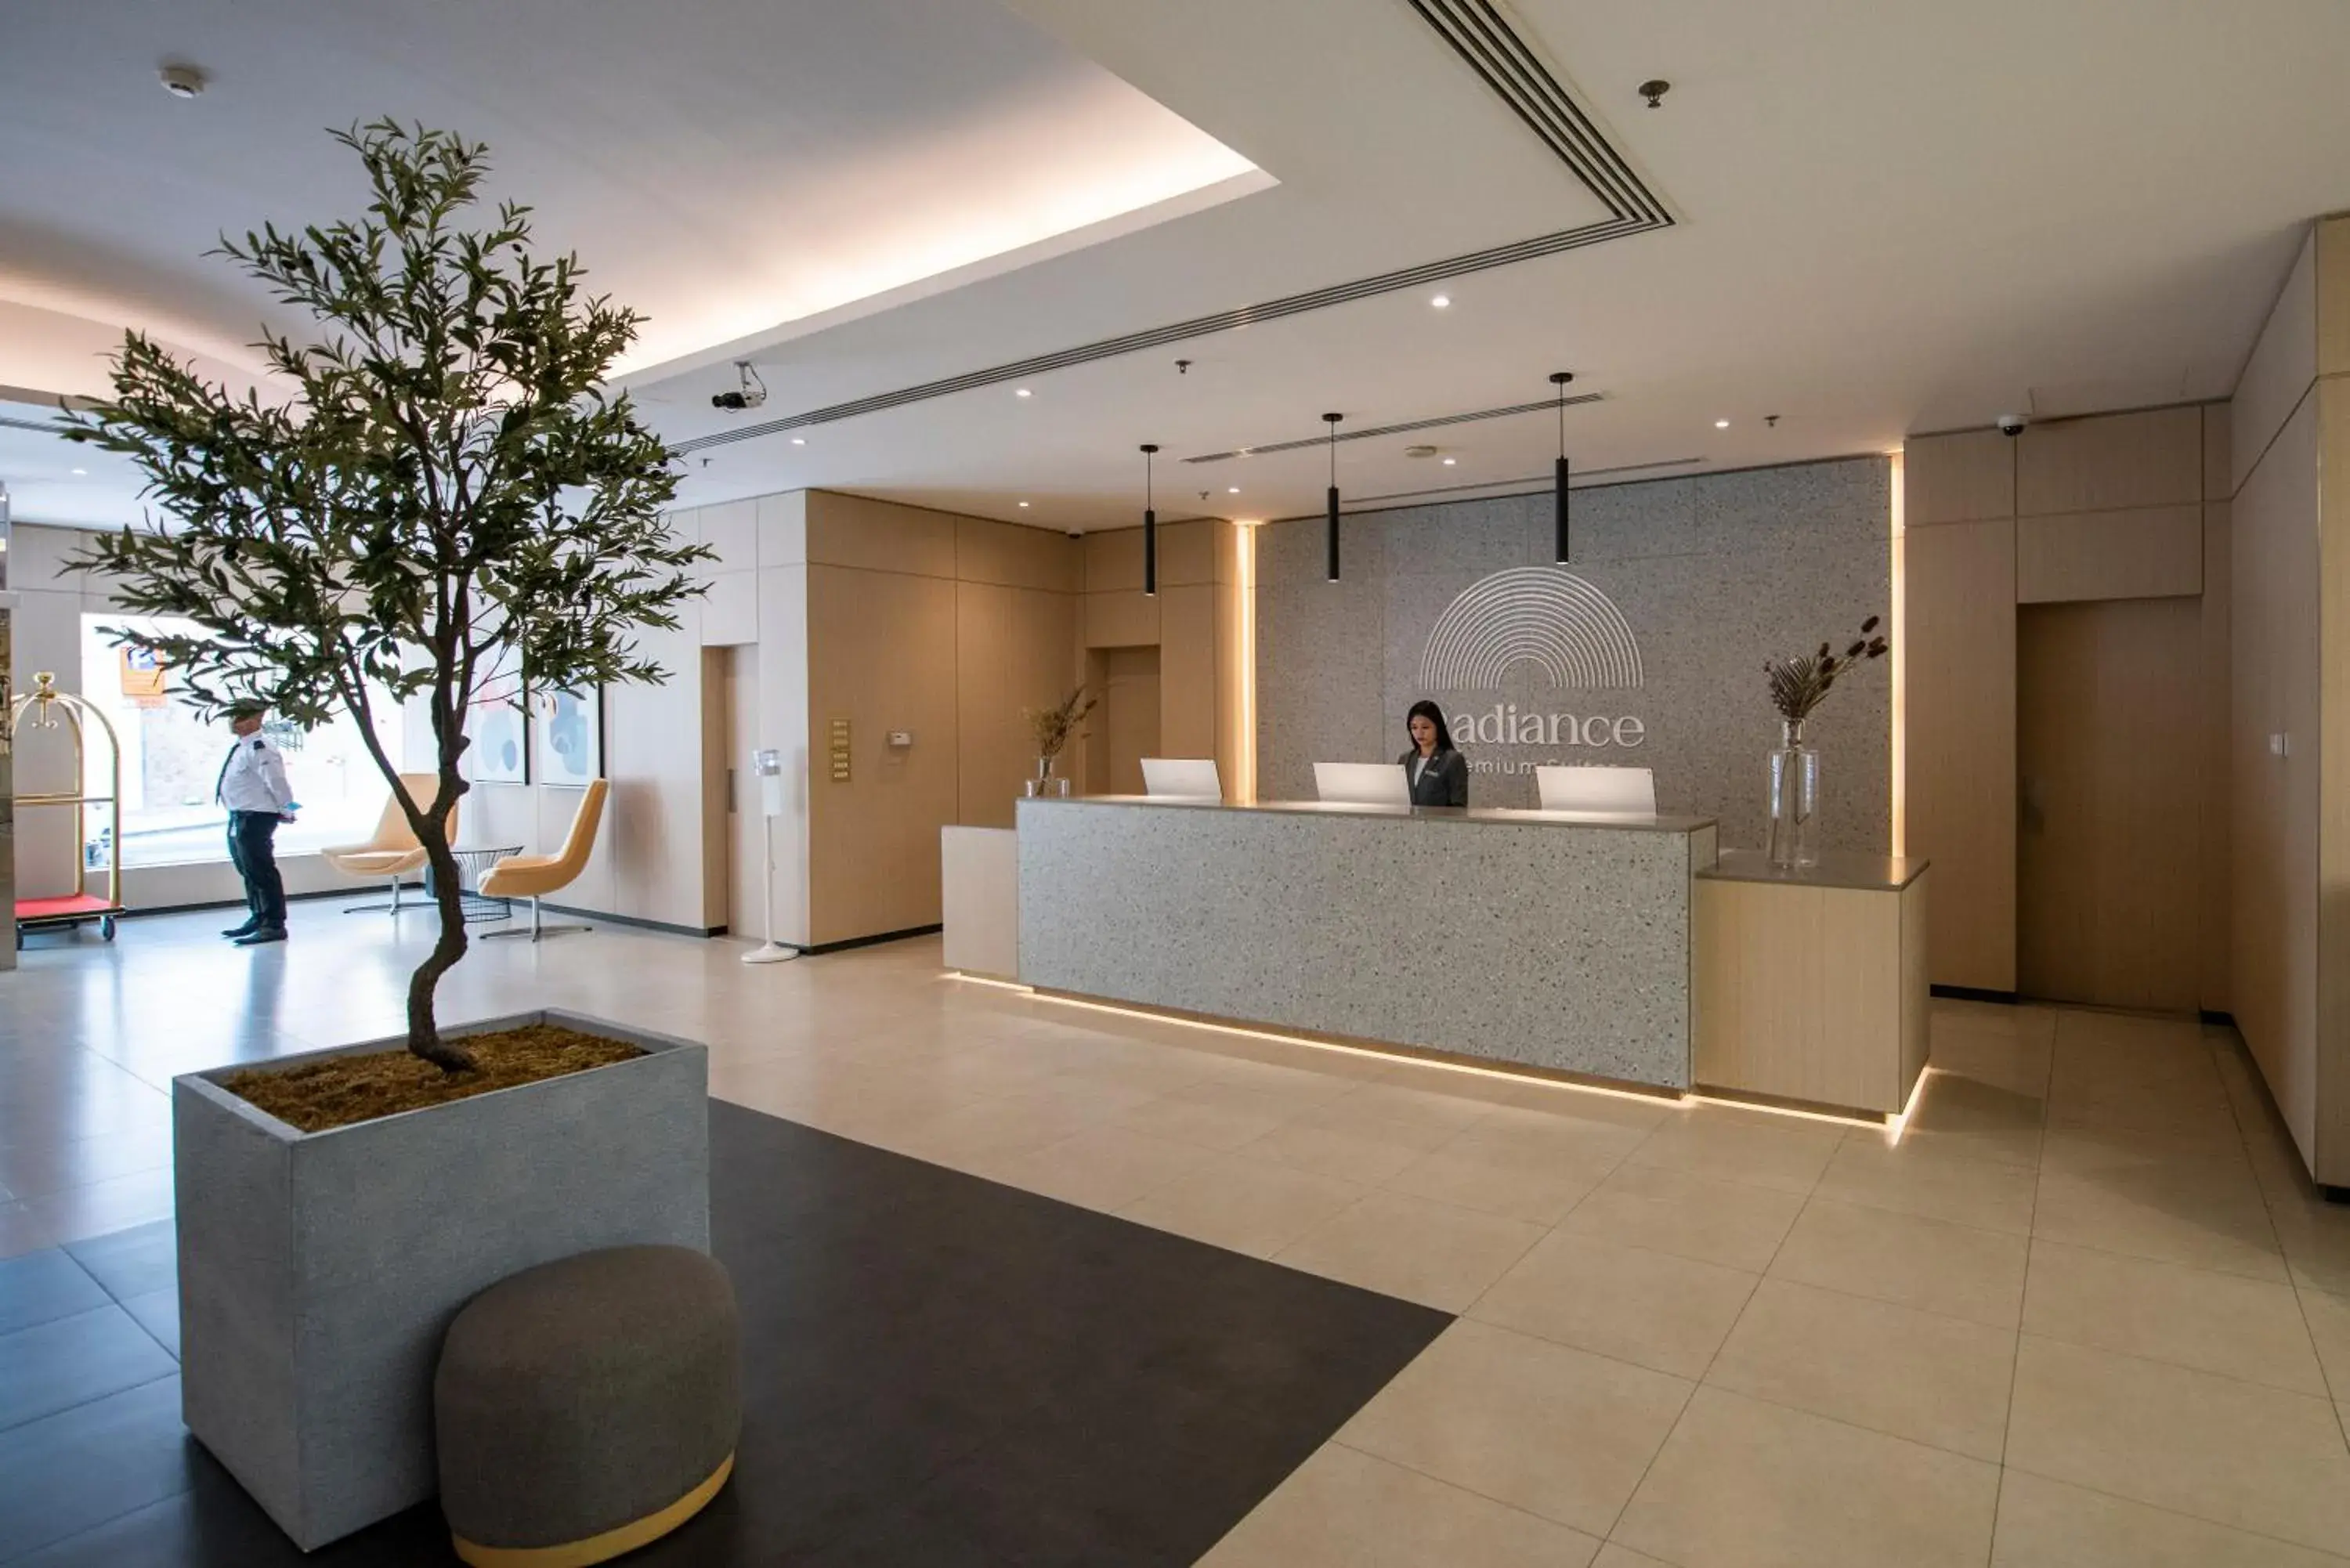 Property building, Lobby/Reception in Radiance Premium Suites